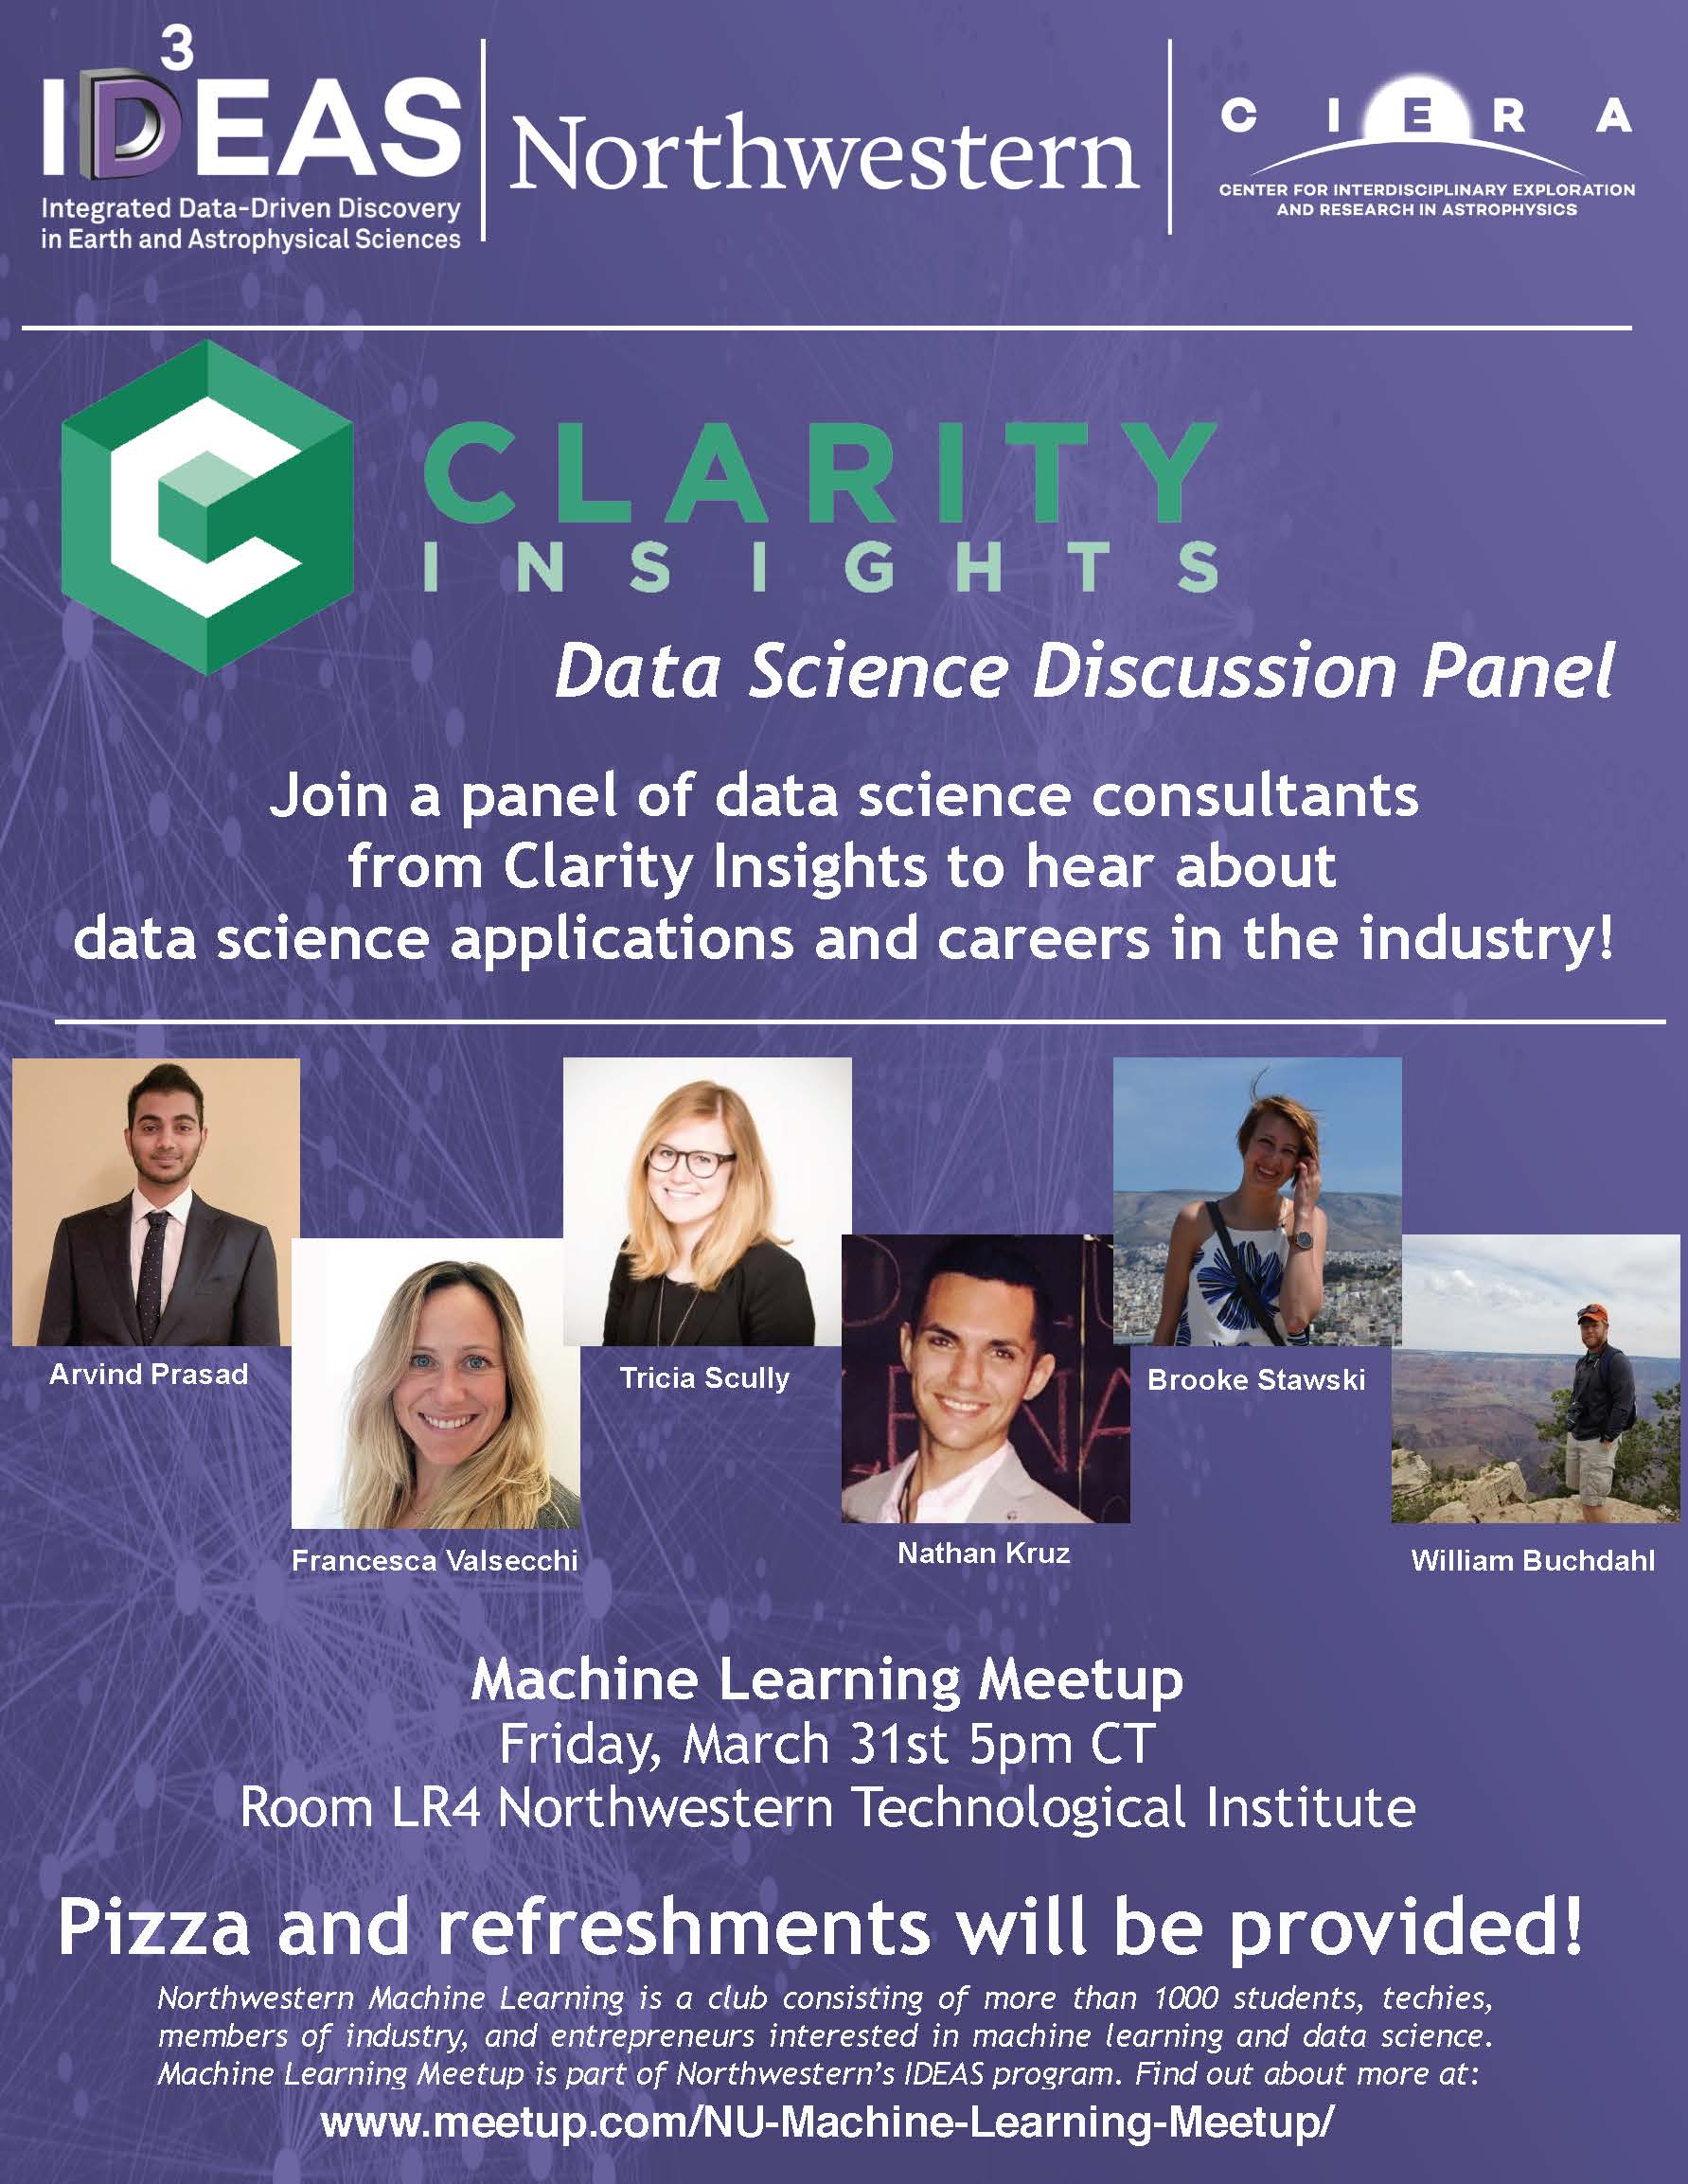 Spring Quarter Machine Learning Meet Up: Data Sci Discussion Panel